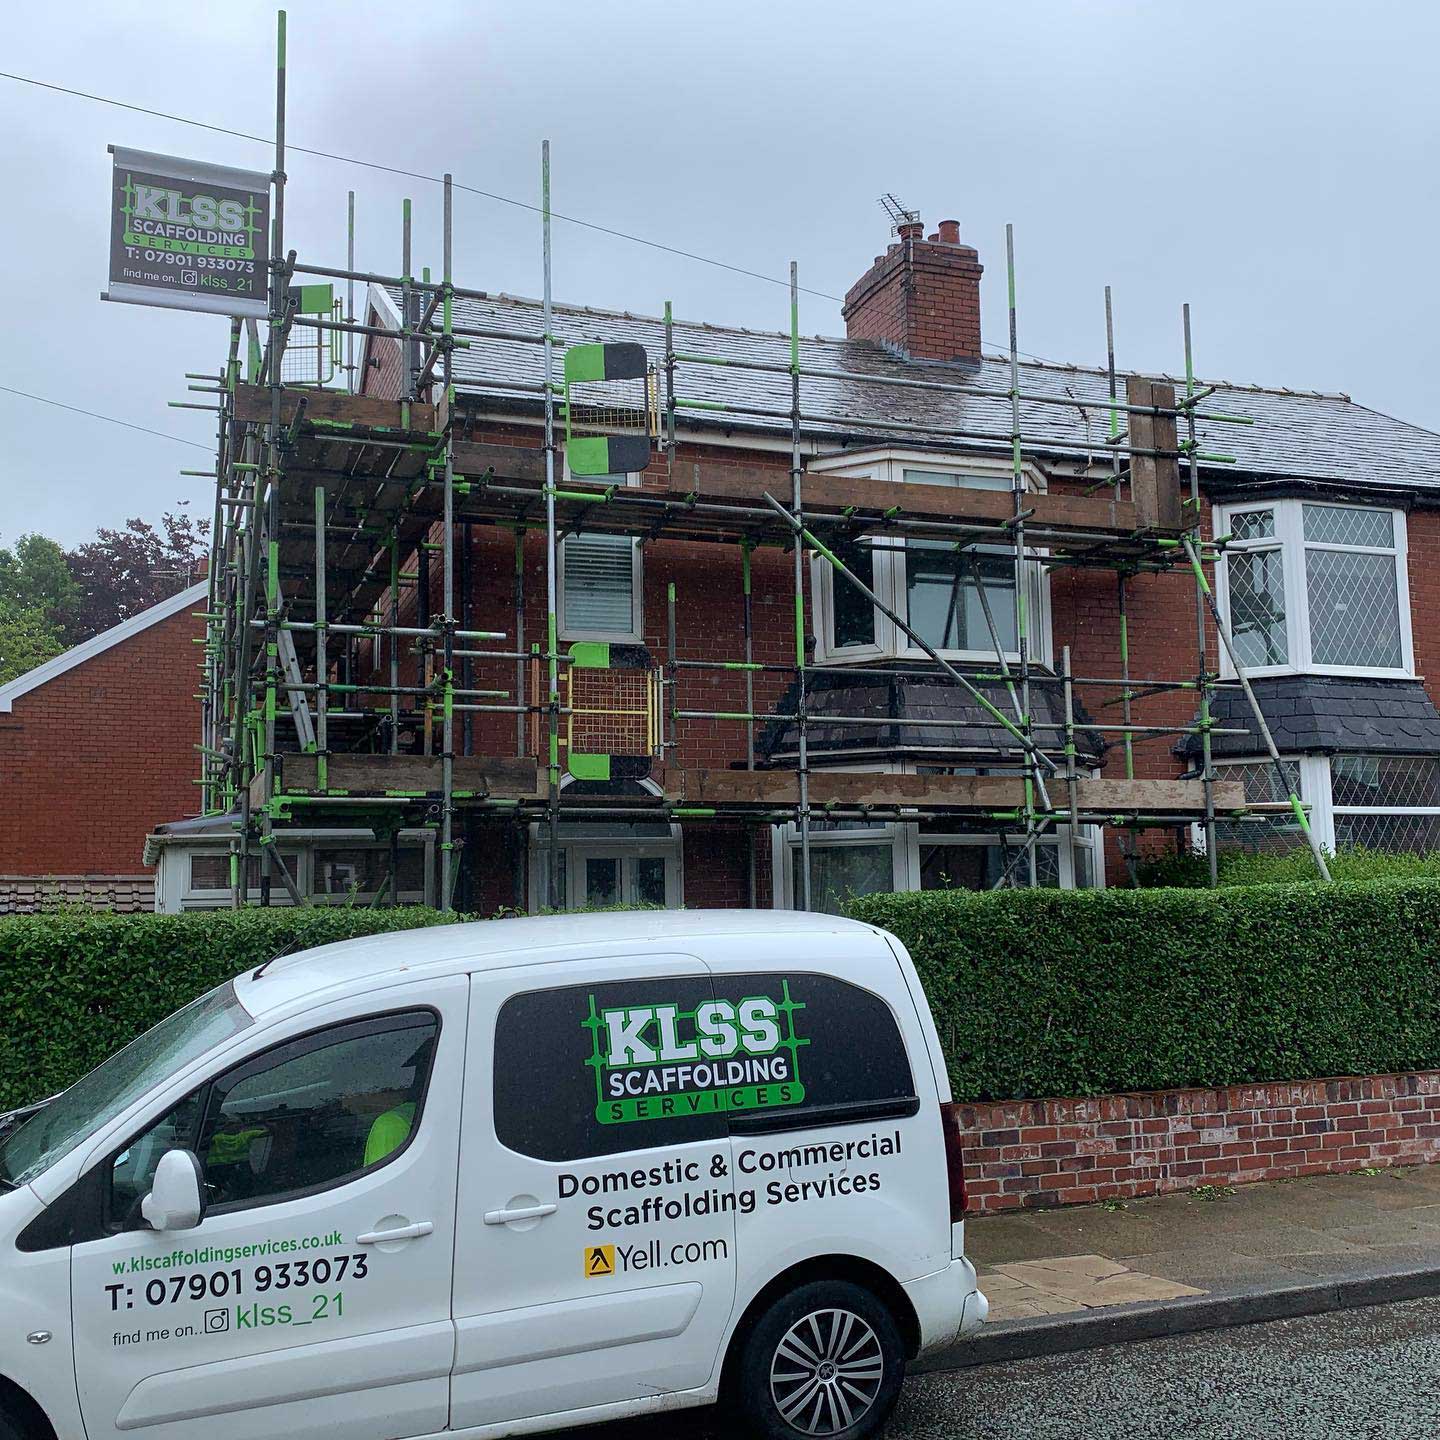 Scaffolding services in Oldham